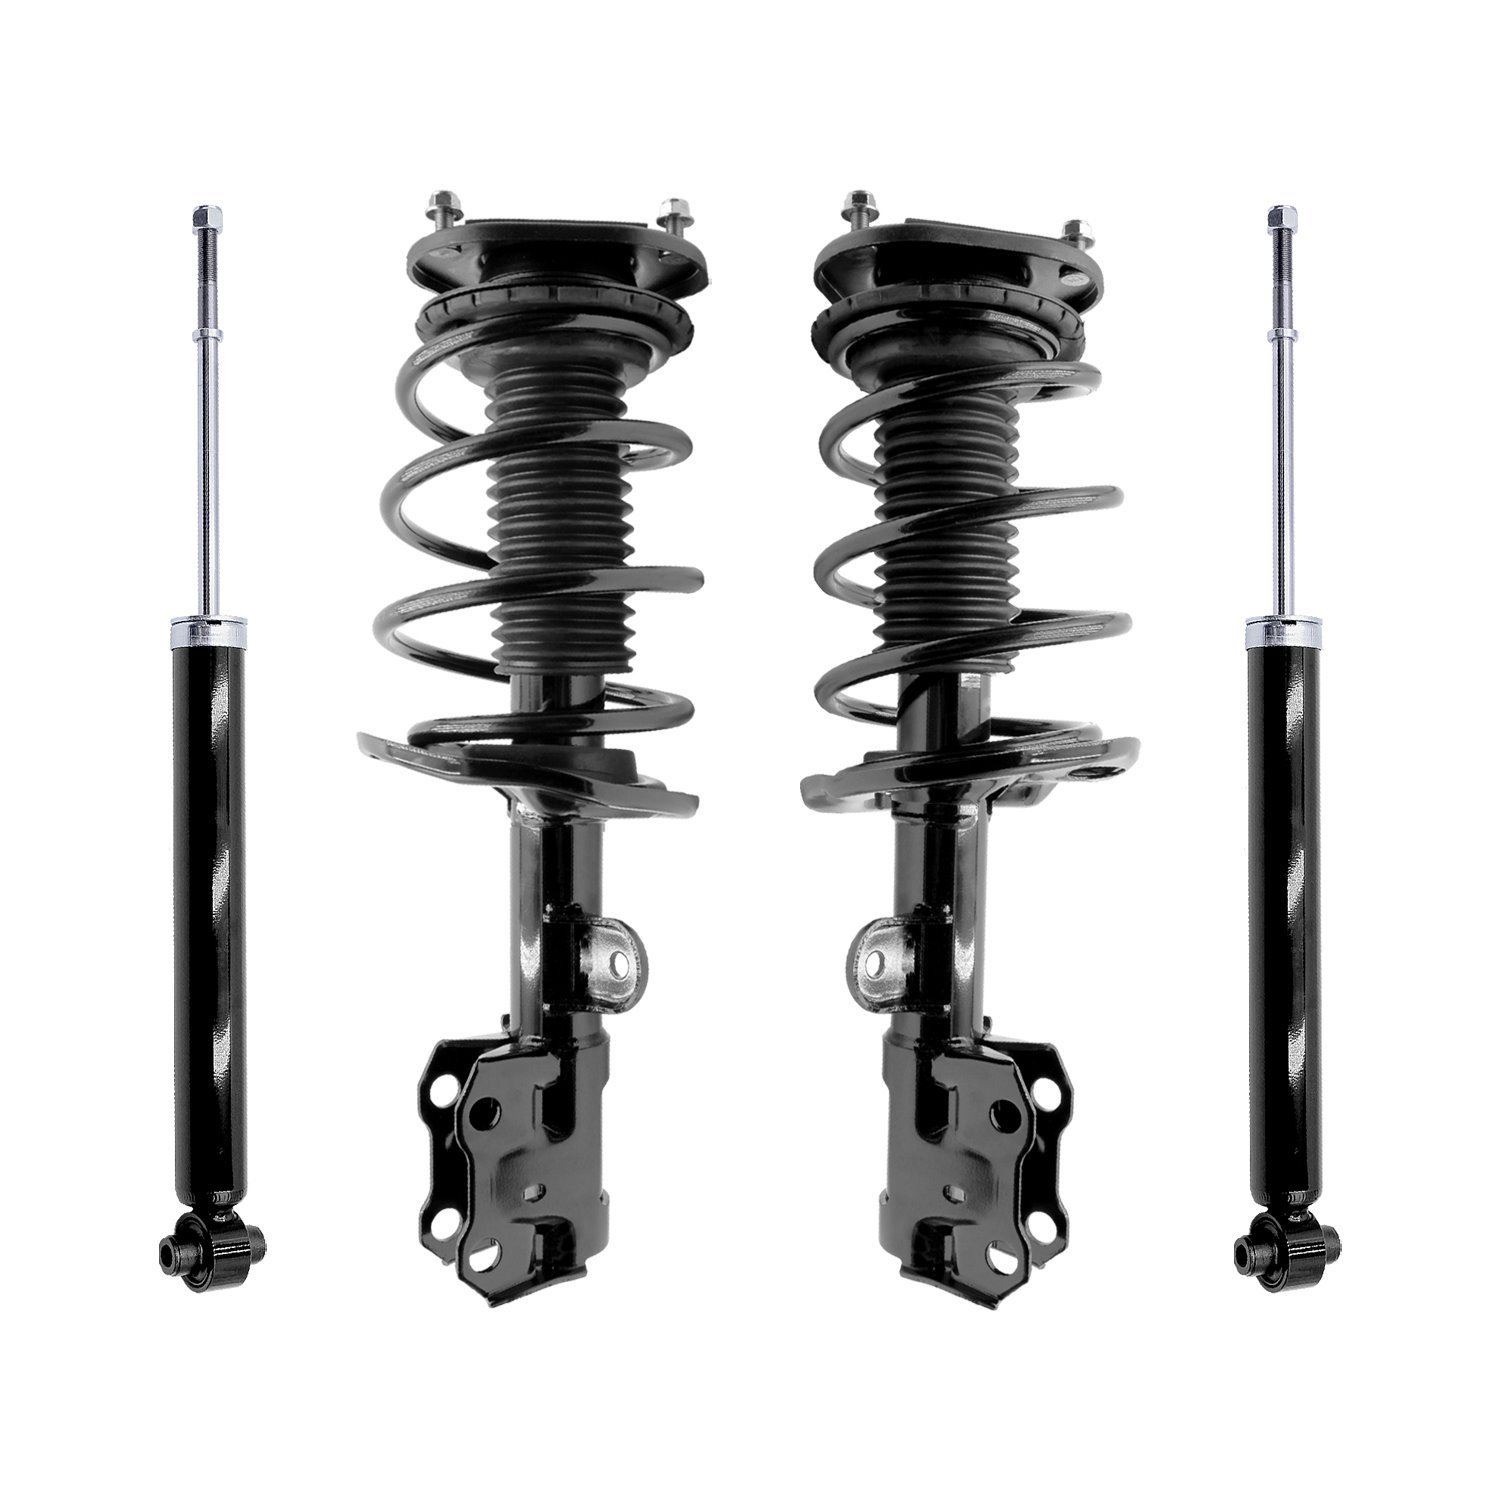 4-13001-250150-001 Front & Rear Complete Strut Assembly Shock Absorber Kit Fits Select Lexus CT200h